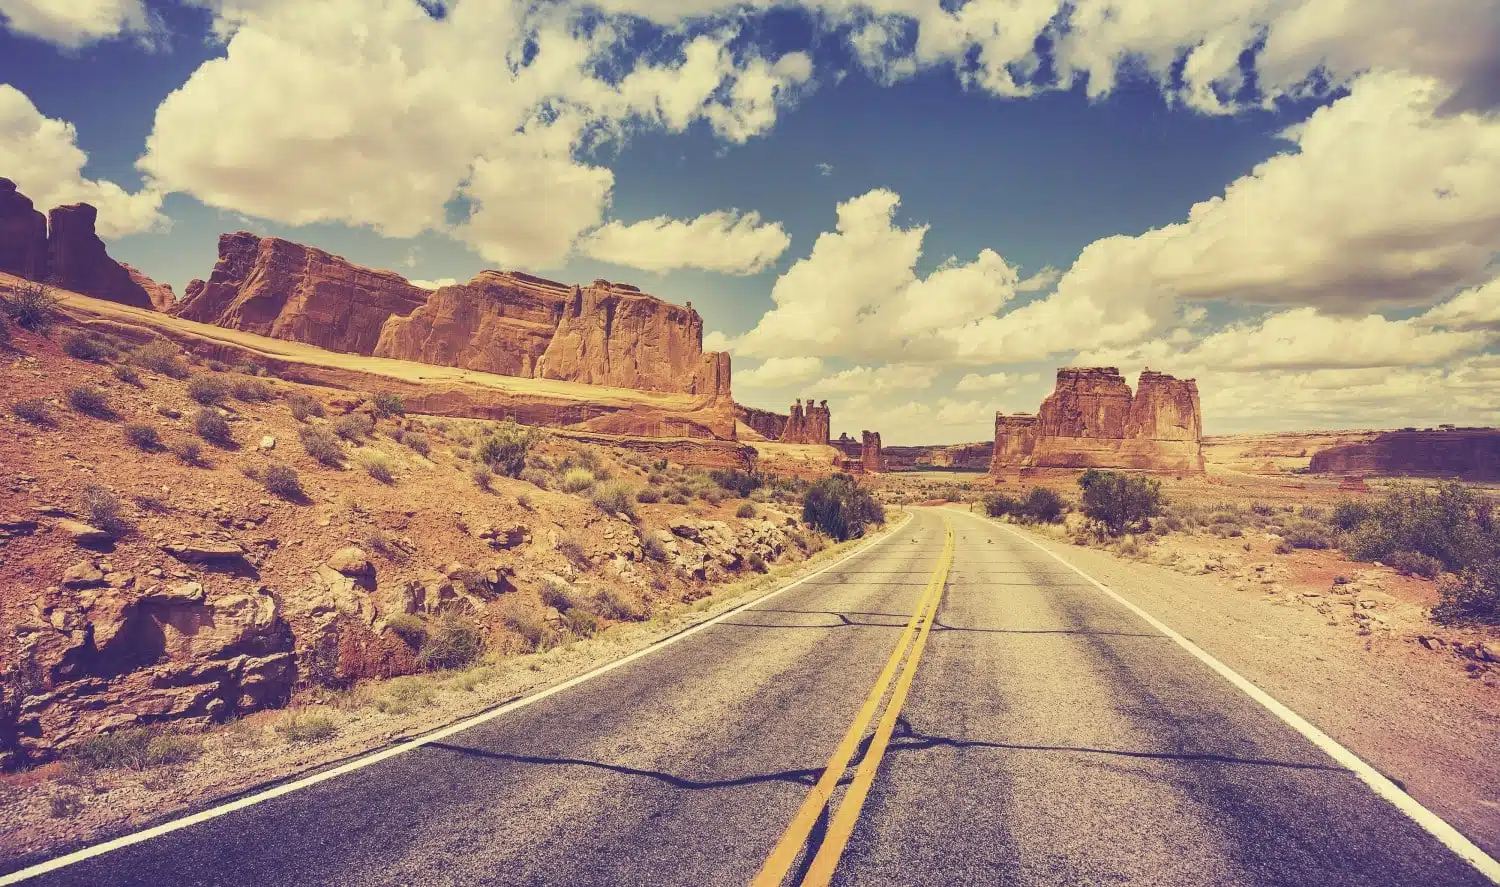 10 Cool Summer Road Trip Ideas Destinations The Discoveries Of